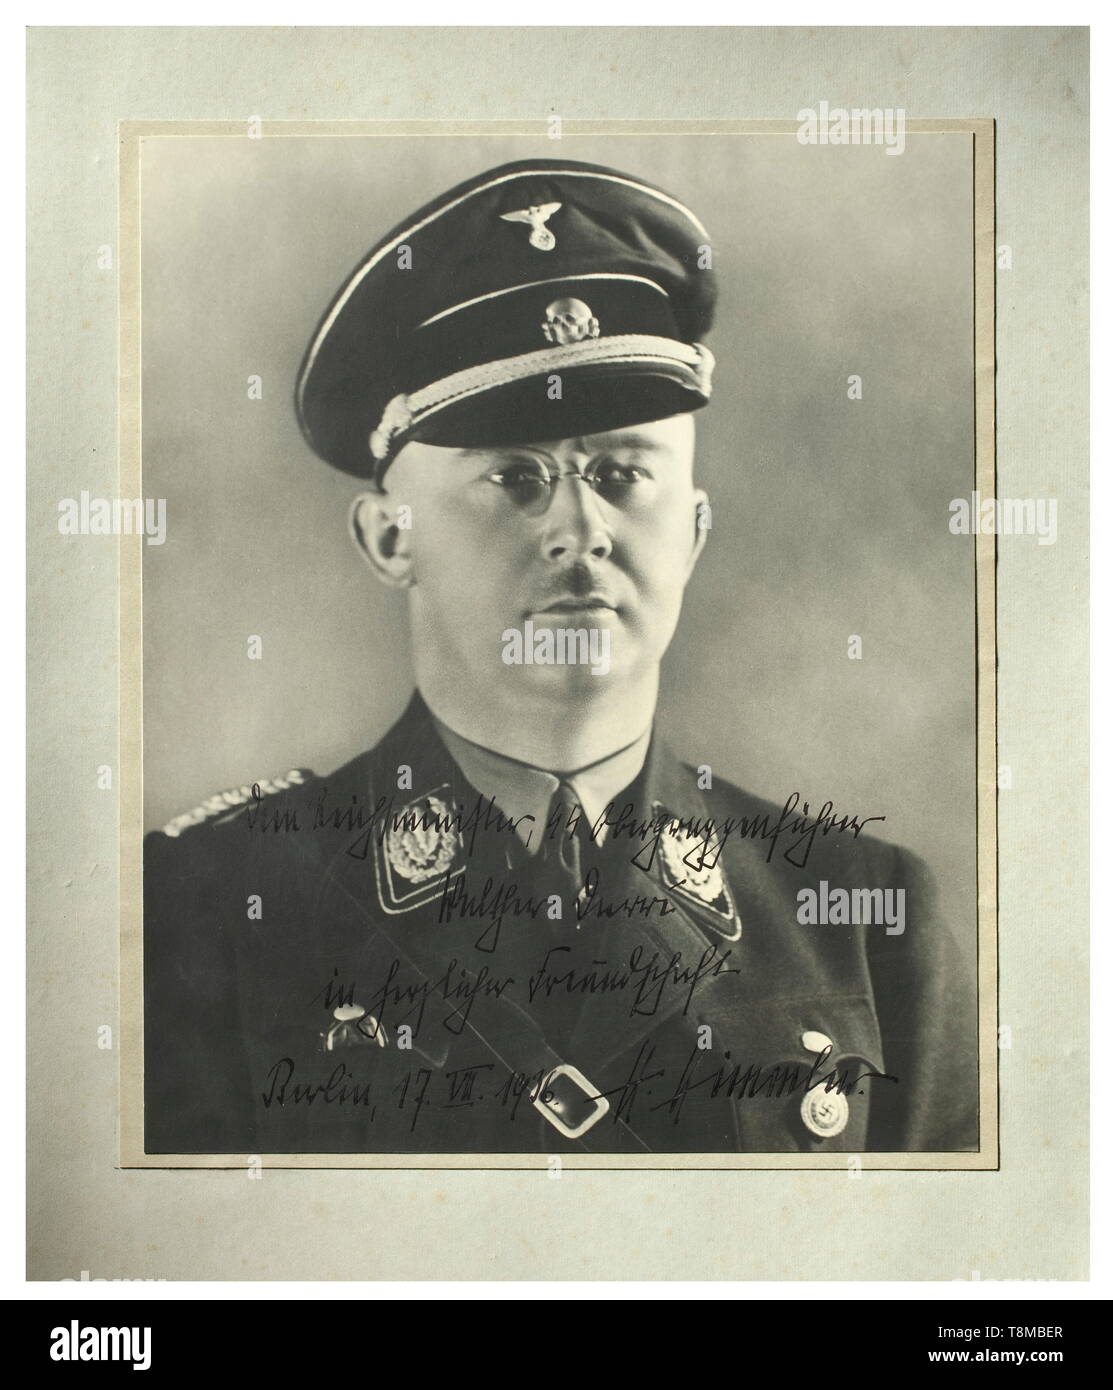 Heinrich Himmer - Walter Darré - a signed portrait Large-size photo of Himmler with dedication (tr.) 'To the Reich Minister SS-Obergruppenführer Walter Darré in cordial friendship Berlin, 17.VII.1936. H. Himmler.' 35 x 30 cm. Due to divergent views, Darré was discharged by 'his friend' Himmler in 1938 from his position as head of the Race and Settlement Office. historic, historical, 20th century, 1930s, NS, National Socialism, Nazism, Third Reich, German Reich, Germany, German, National Socialist, Nazi, Nazi period, fascism, Editorial-Use-Only Stock Photo